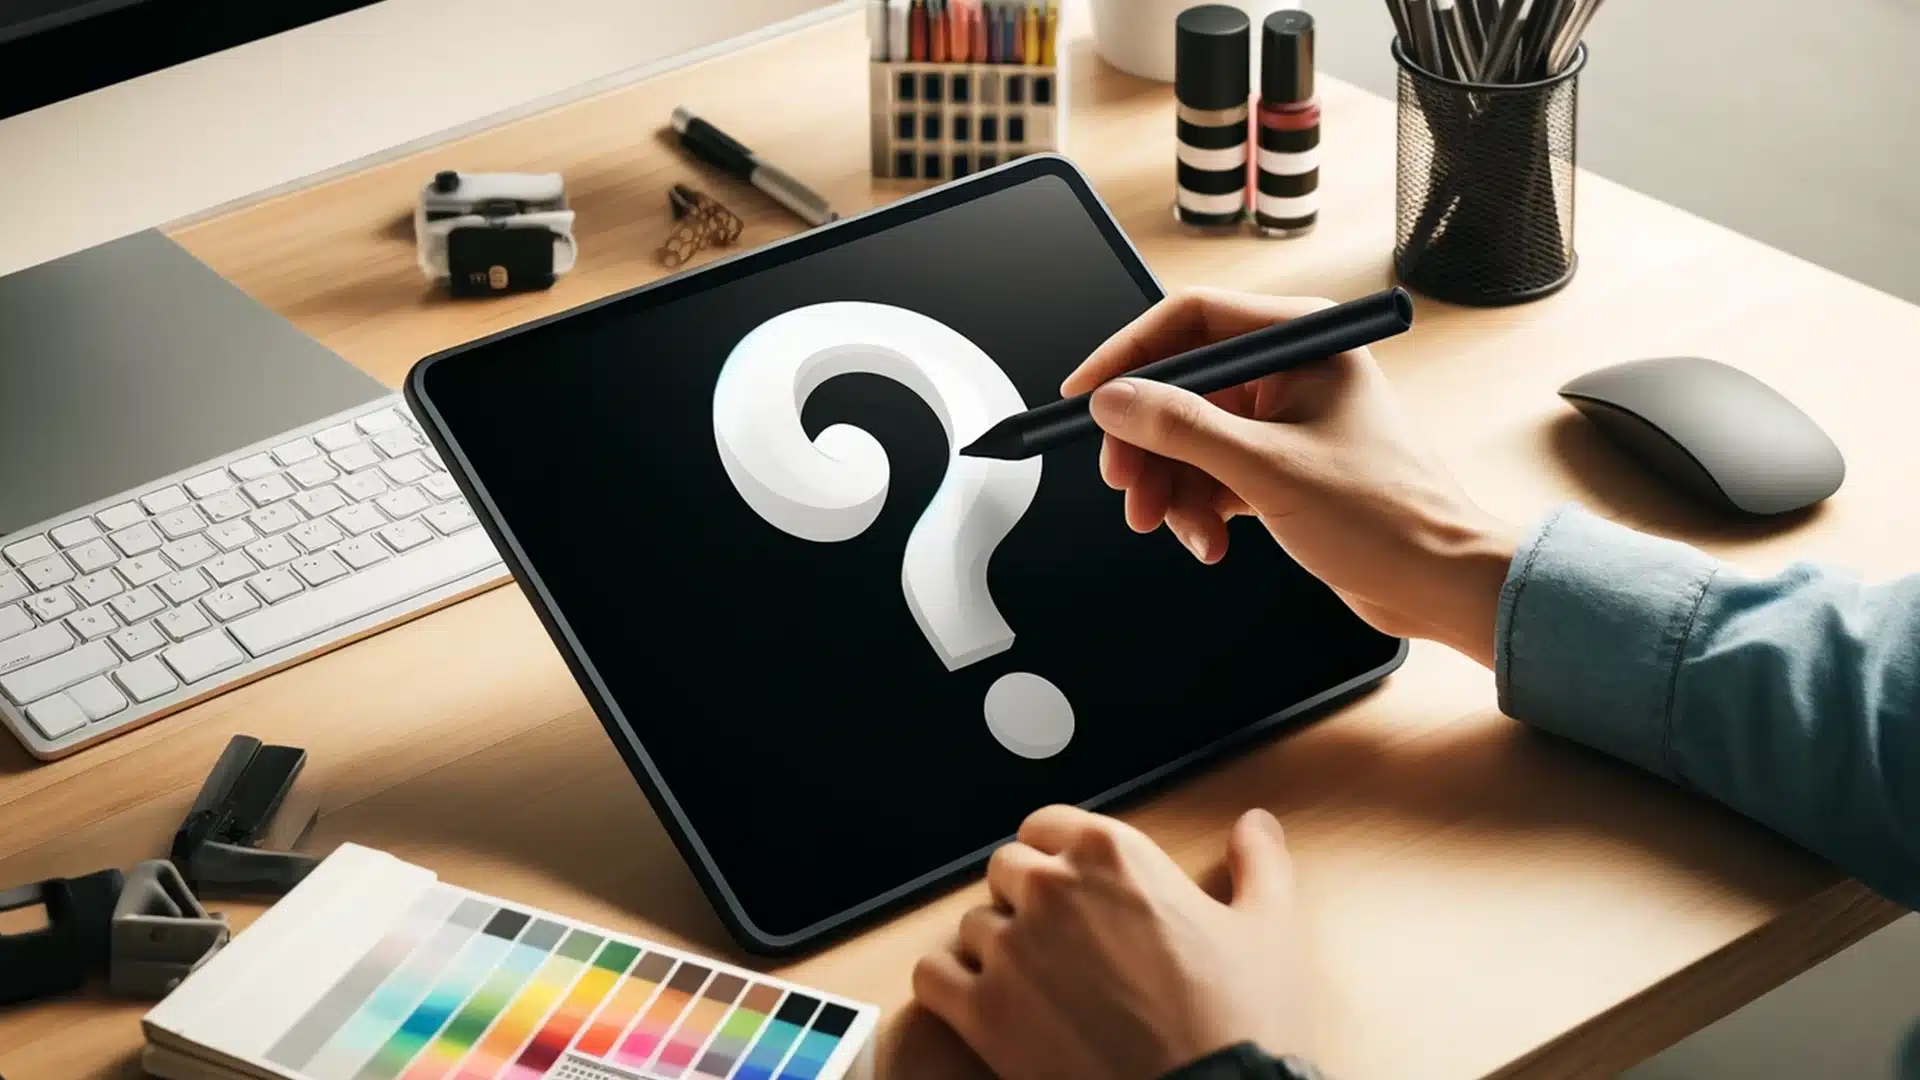 A graphic designer's workspace with a tablet displaying question mark, actively being colored by the designer using a stylus.